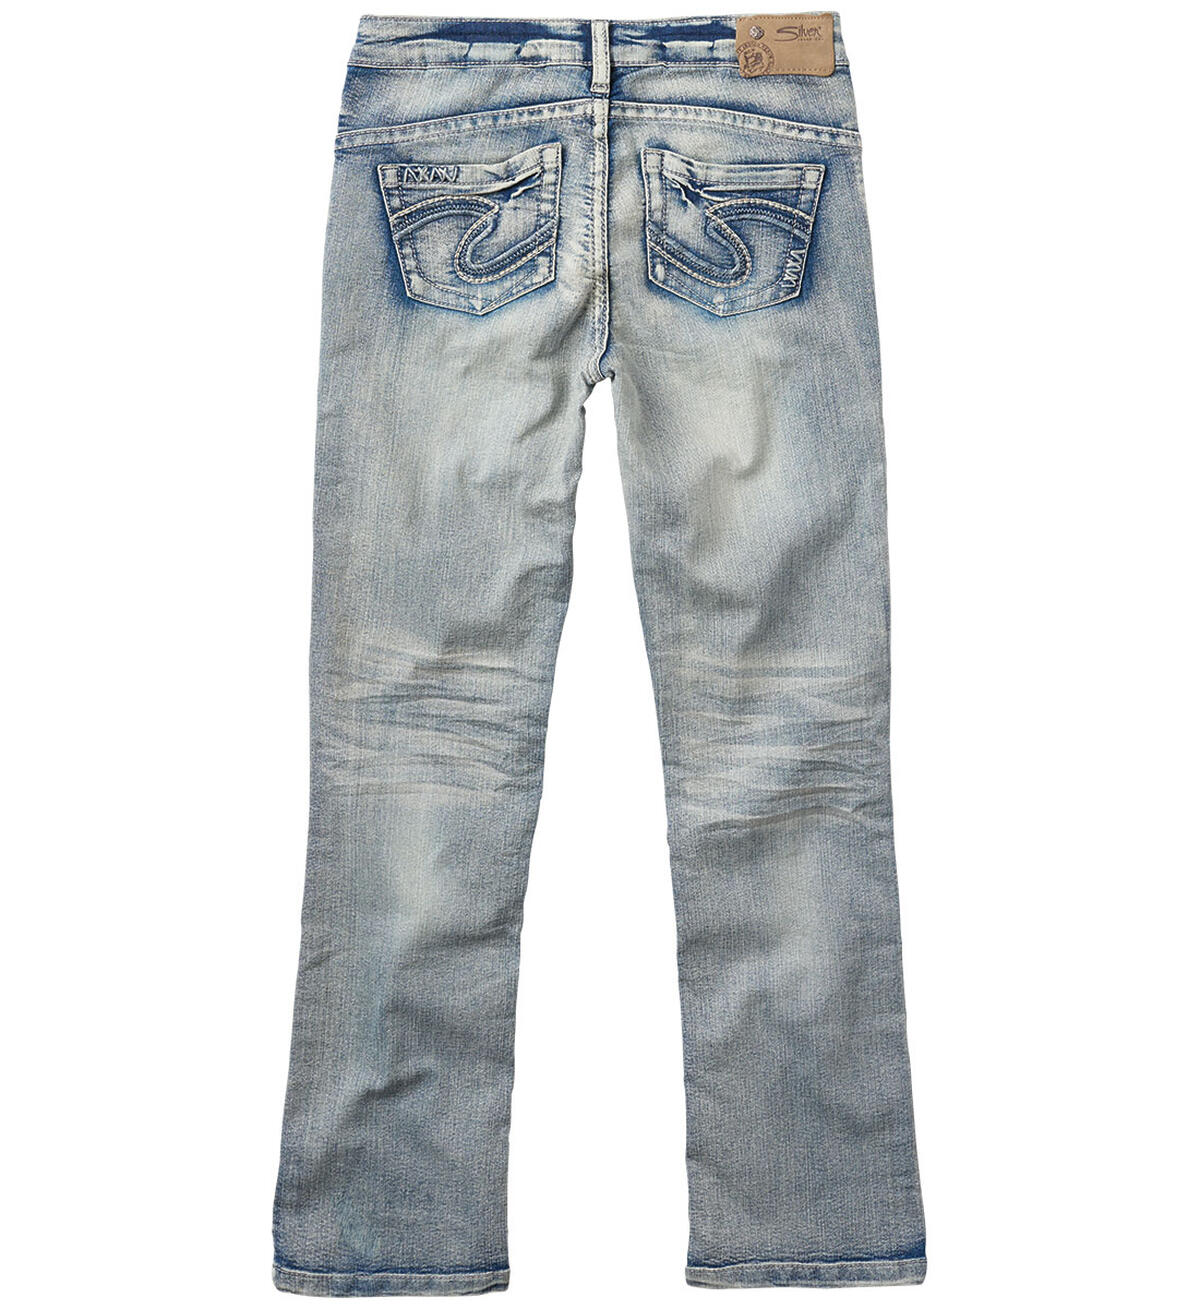 Tammy Bootcut Jeans in Bleached Wash (7-16), , hi-res image number 1